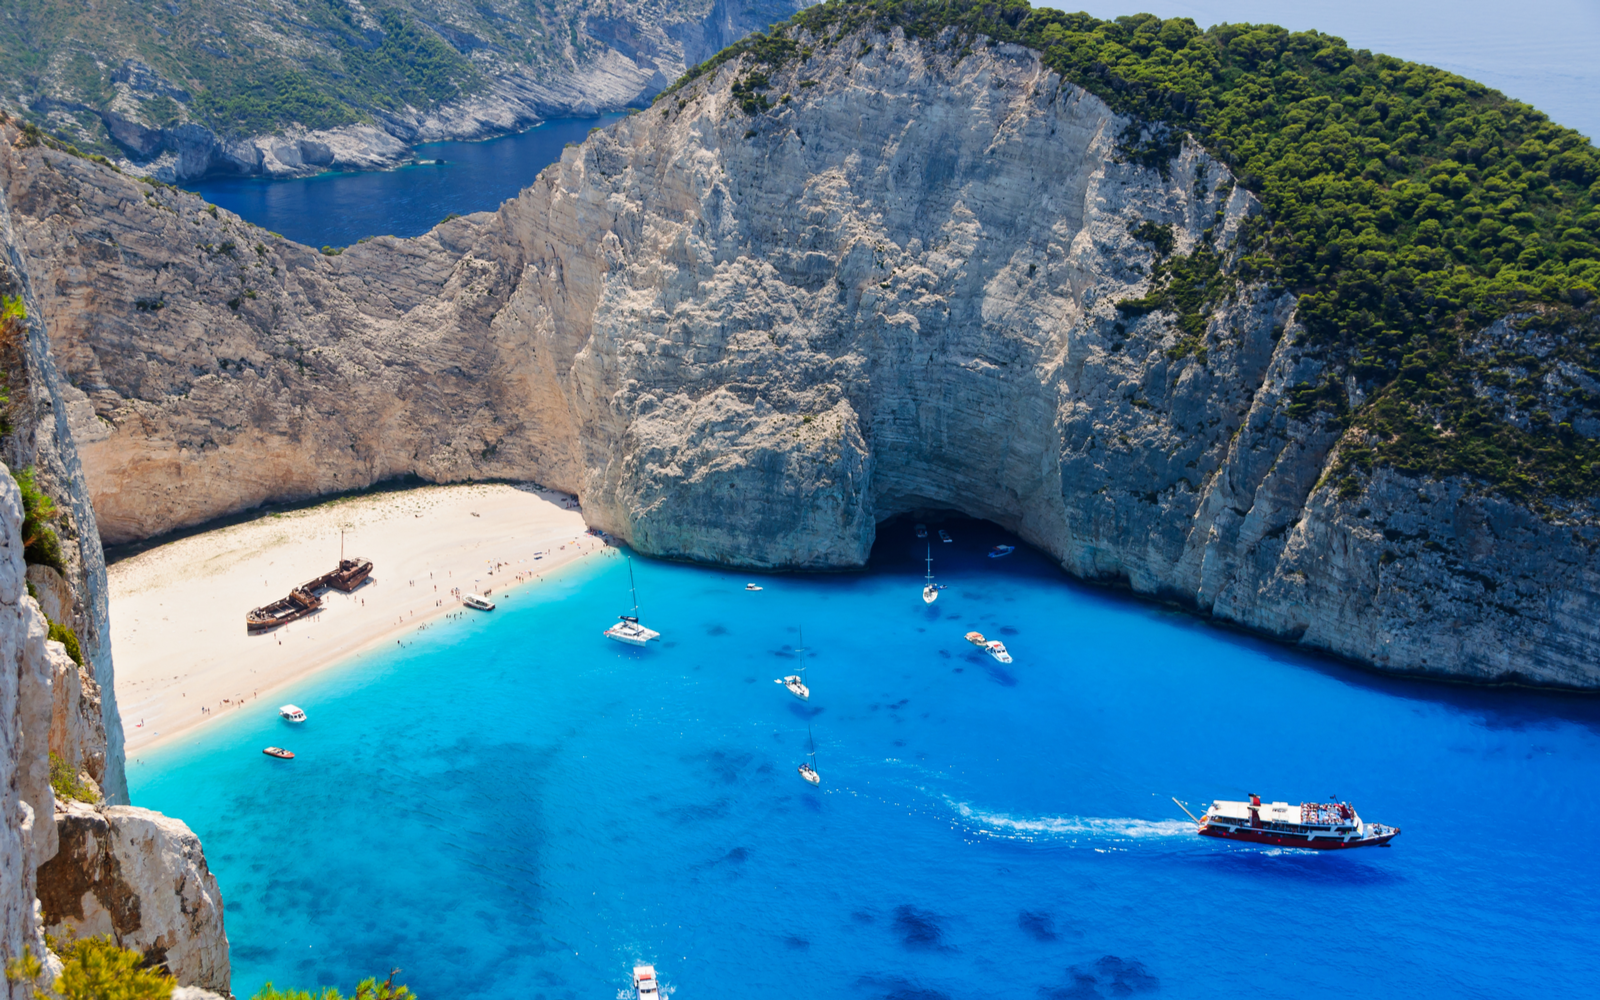 Zakynthos island, one of the best beaches in Greece, as seen from above